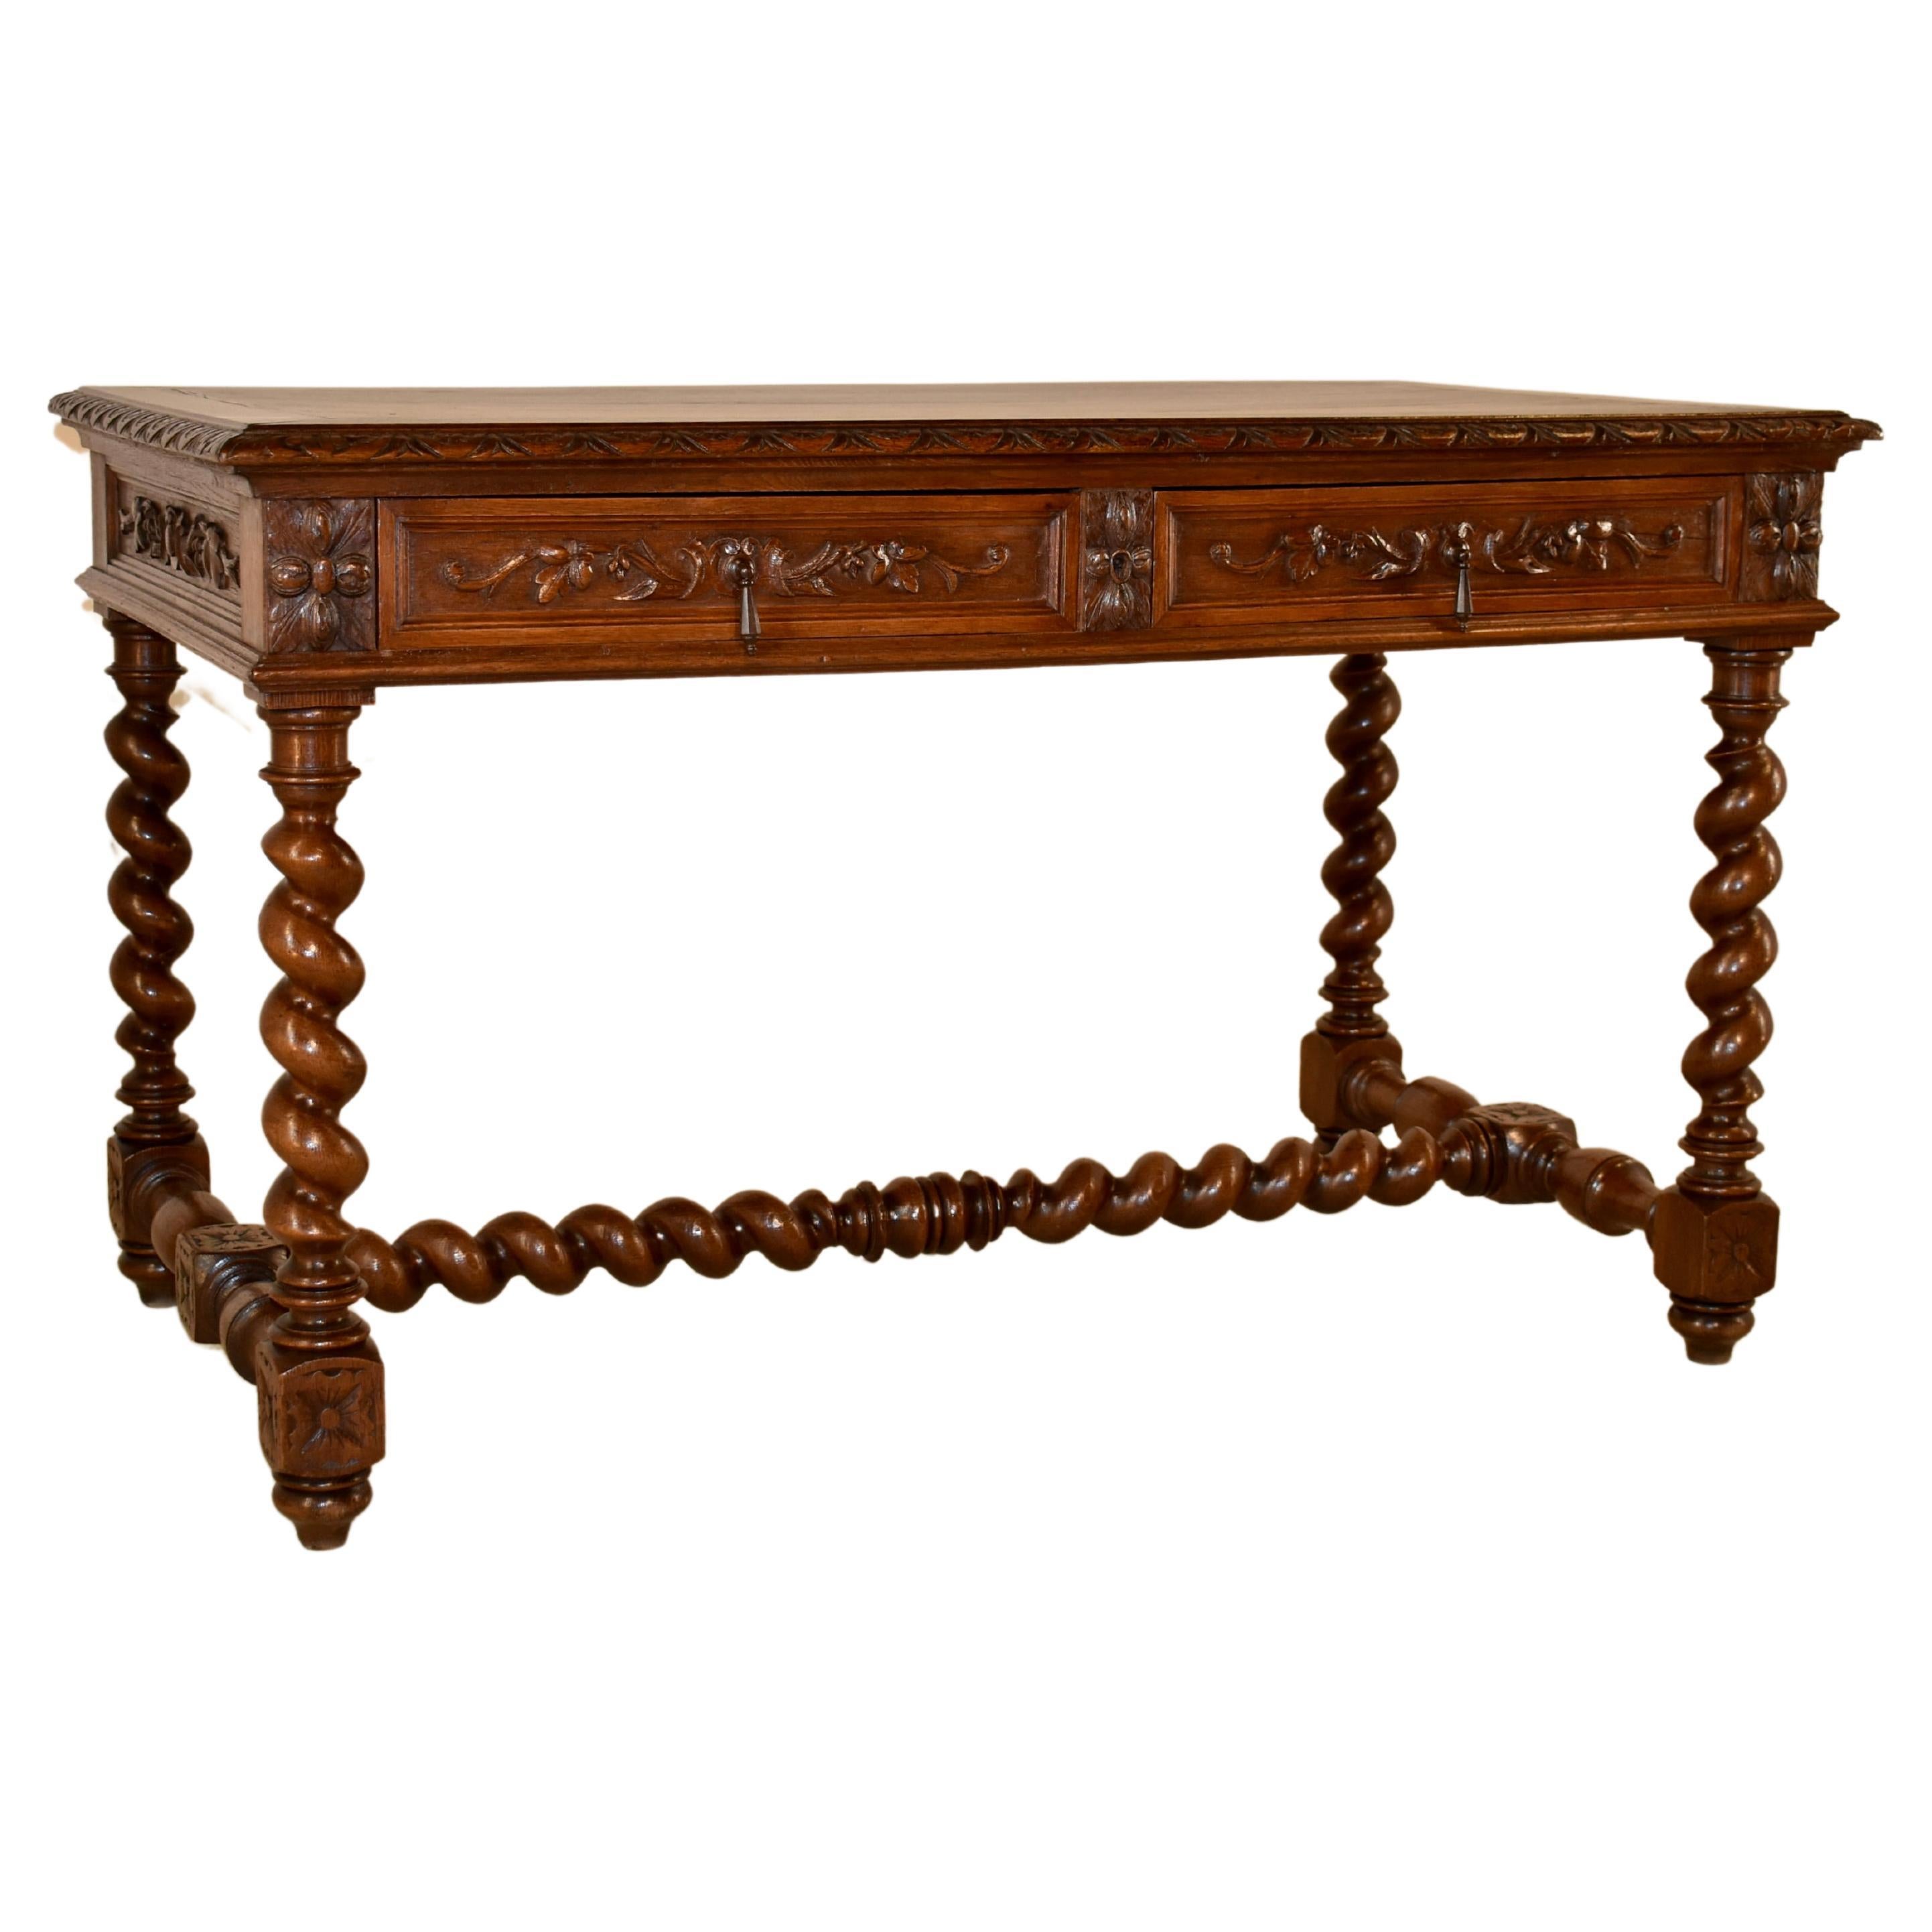 19th Century French Oak Writing Table